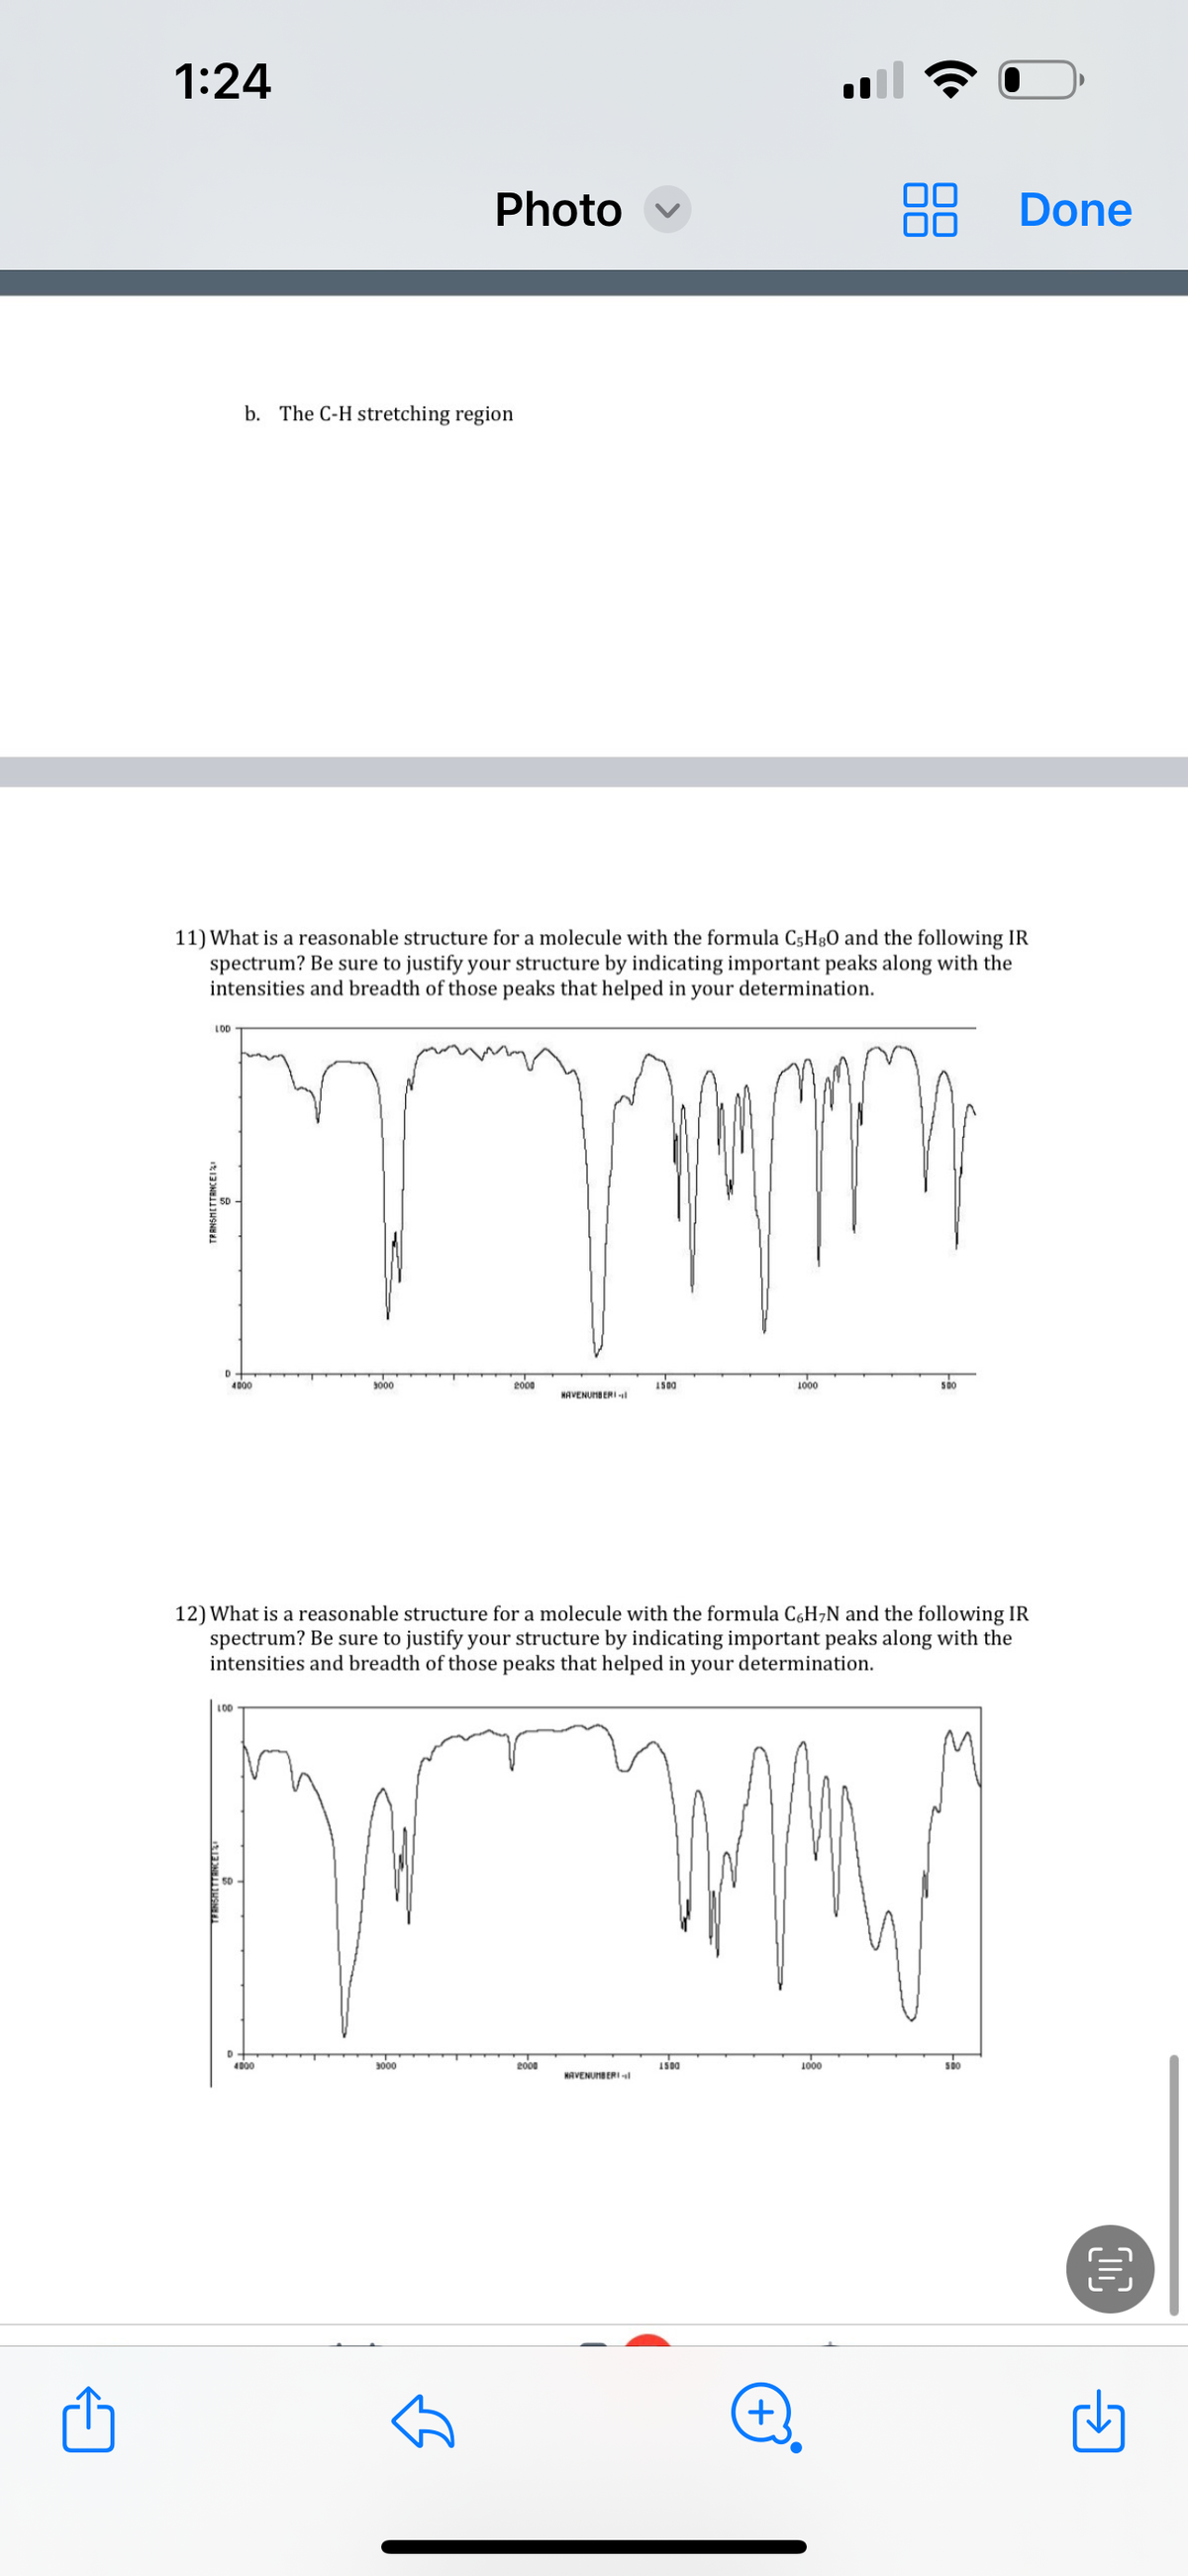 1:24
LOD
TRANSMETTANCEI
11) What is a reasonable structure for a molecule with the formula C5H80 and the following IR
spectrum? Be sure to justify your structure by indicating important peaks along with the
intensities and breadth of those peaks that helped in your determination.
D
b. The C-H stretching region
4000
LOD
Photo
3000
4000
3000
Tum
2000
HAVENUMBERI
2000
12) What is a reasonable structure for a molecule with the formula C6H₂N and the following IR
spectrum? Be sure to justify your structure by indicating important peaks along with the
intensities and breadth of those peaks that helped in your determination.
1500
NAVENUMBERI
1500
1000
+
500
1000
Done
500
O